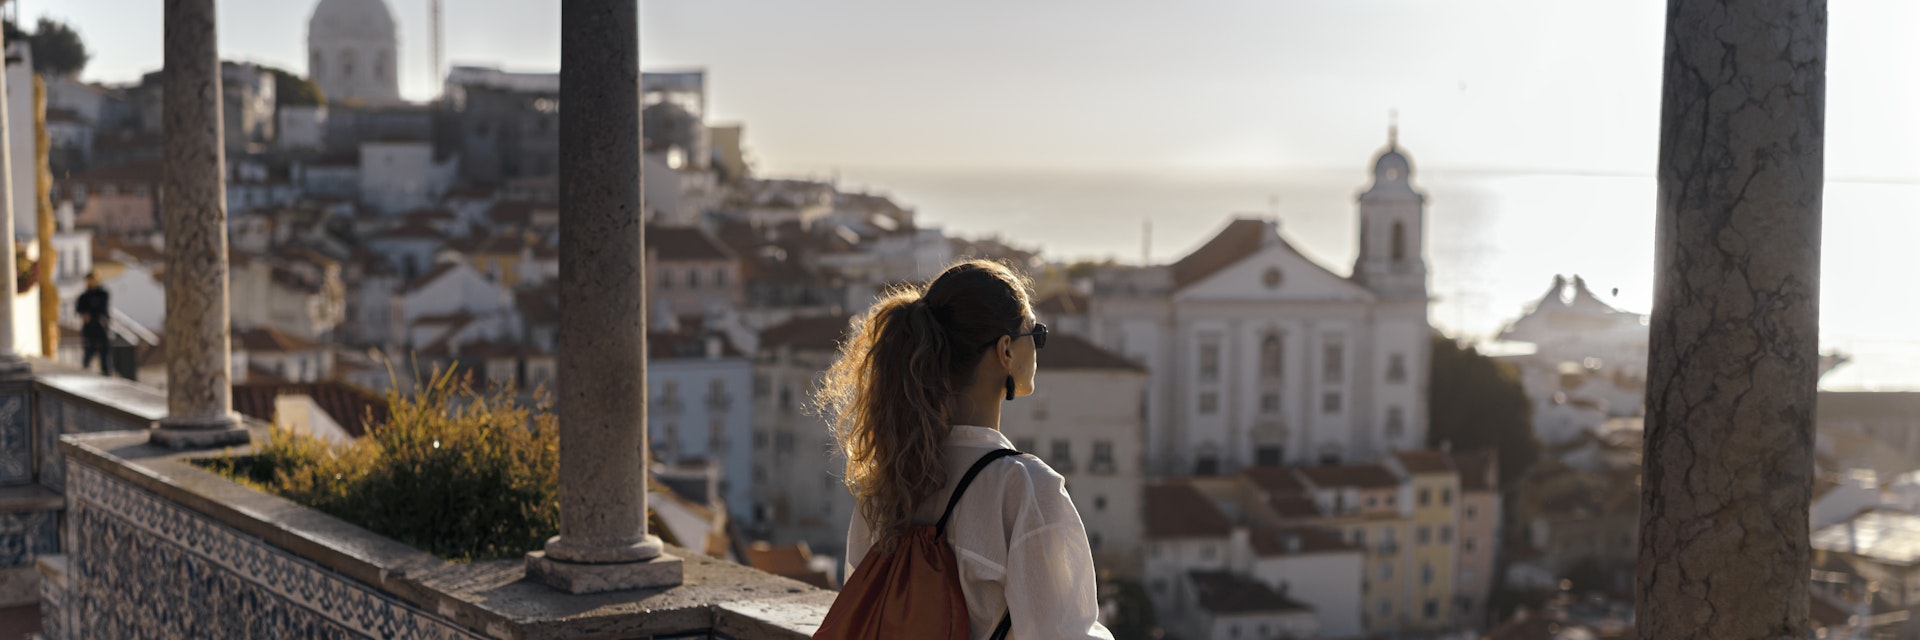 Scene with a female tourist who is walking on the street of Iberic city and poses in a famous, most recognizable places with breathtaking view
1184183844
safari shorts